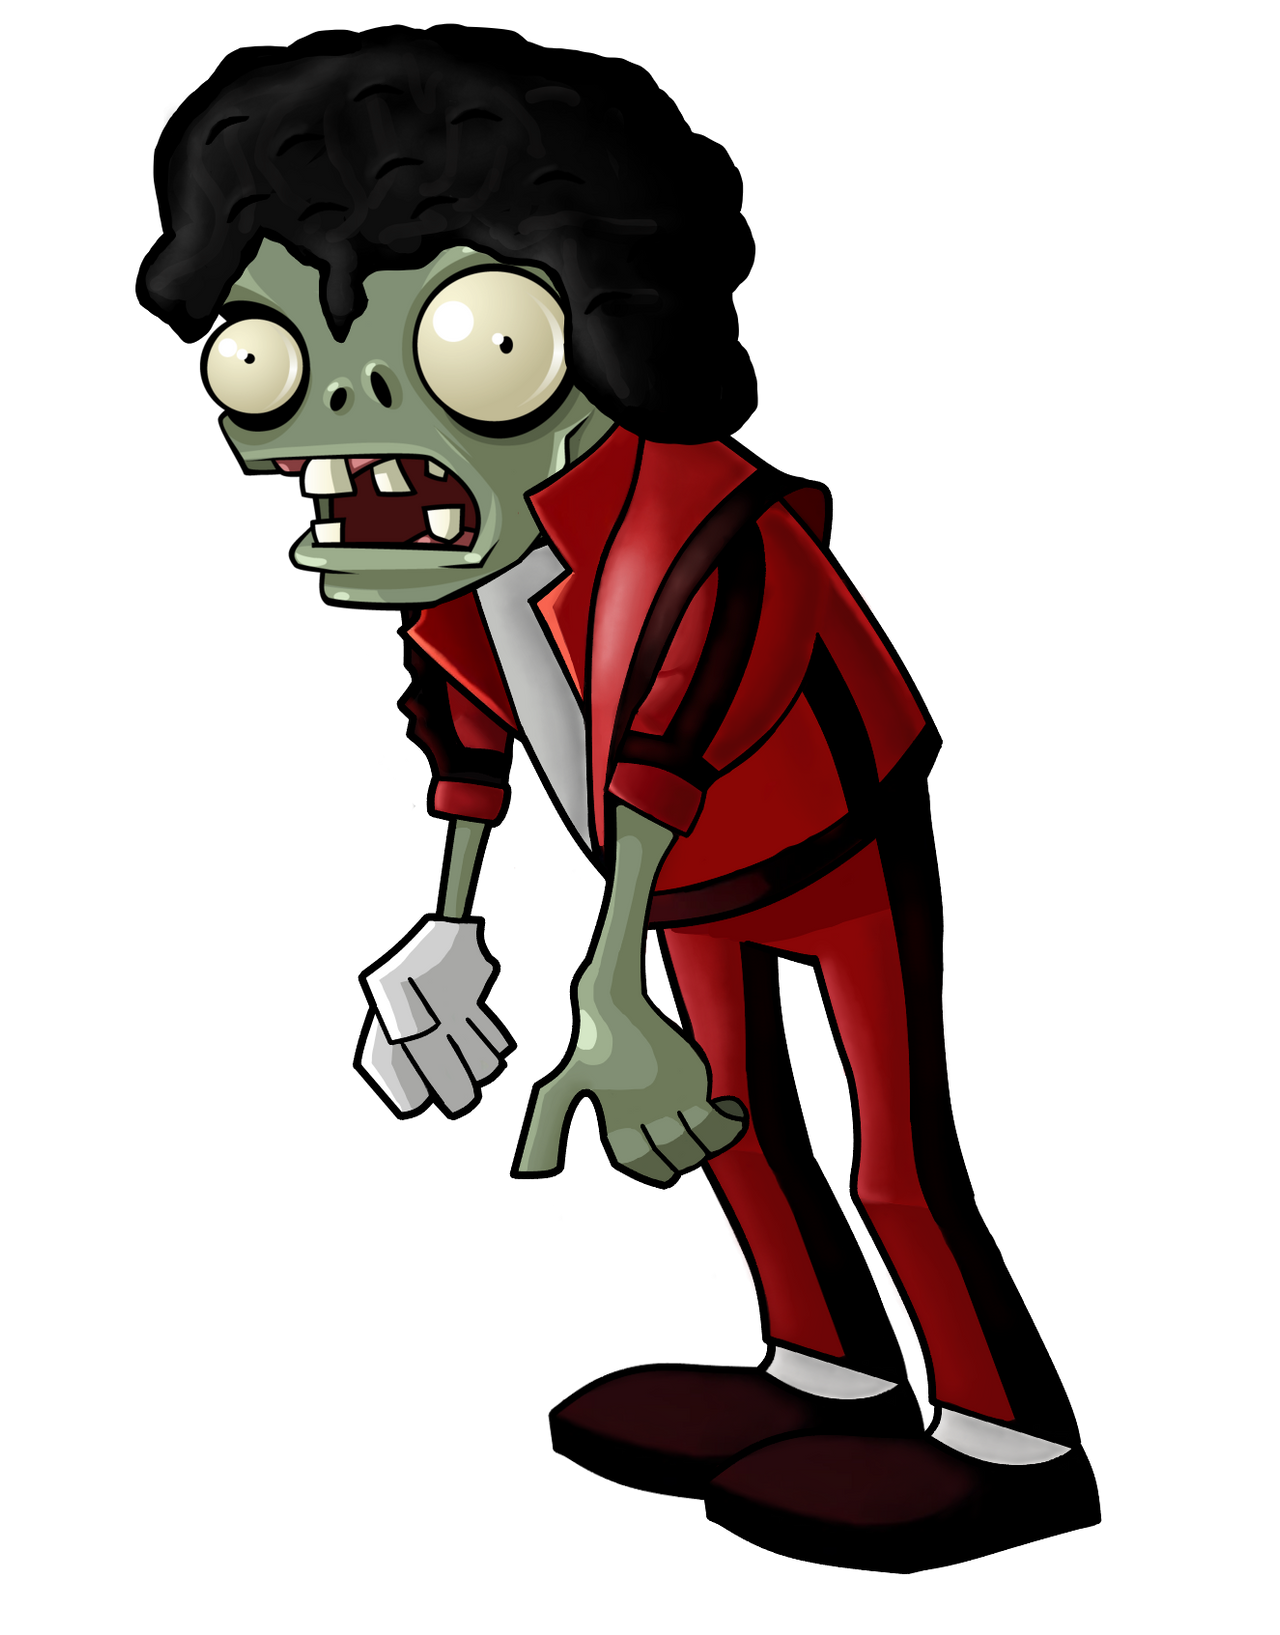 Plants vs Zombies HD Target Zombie by KnockoffBandit on DeviantArt